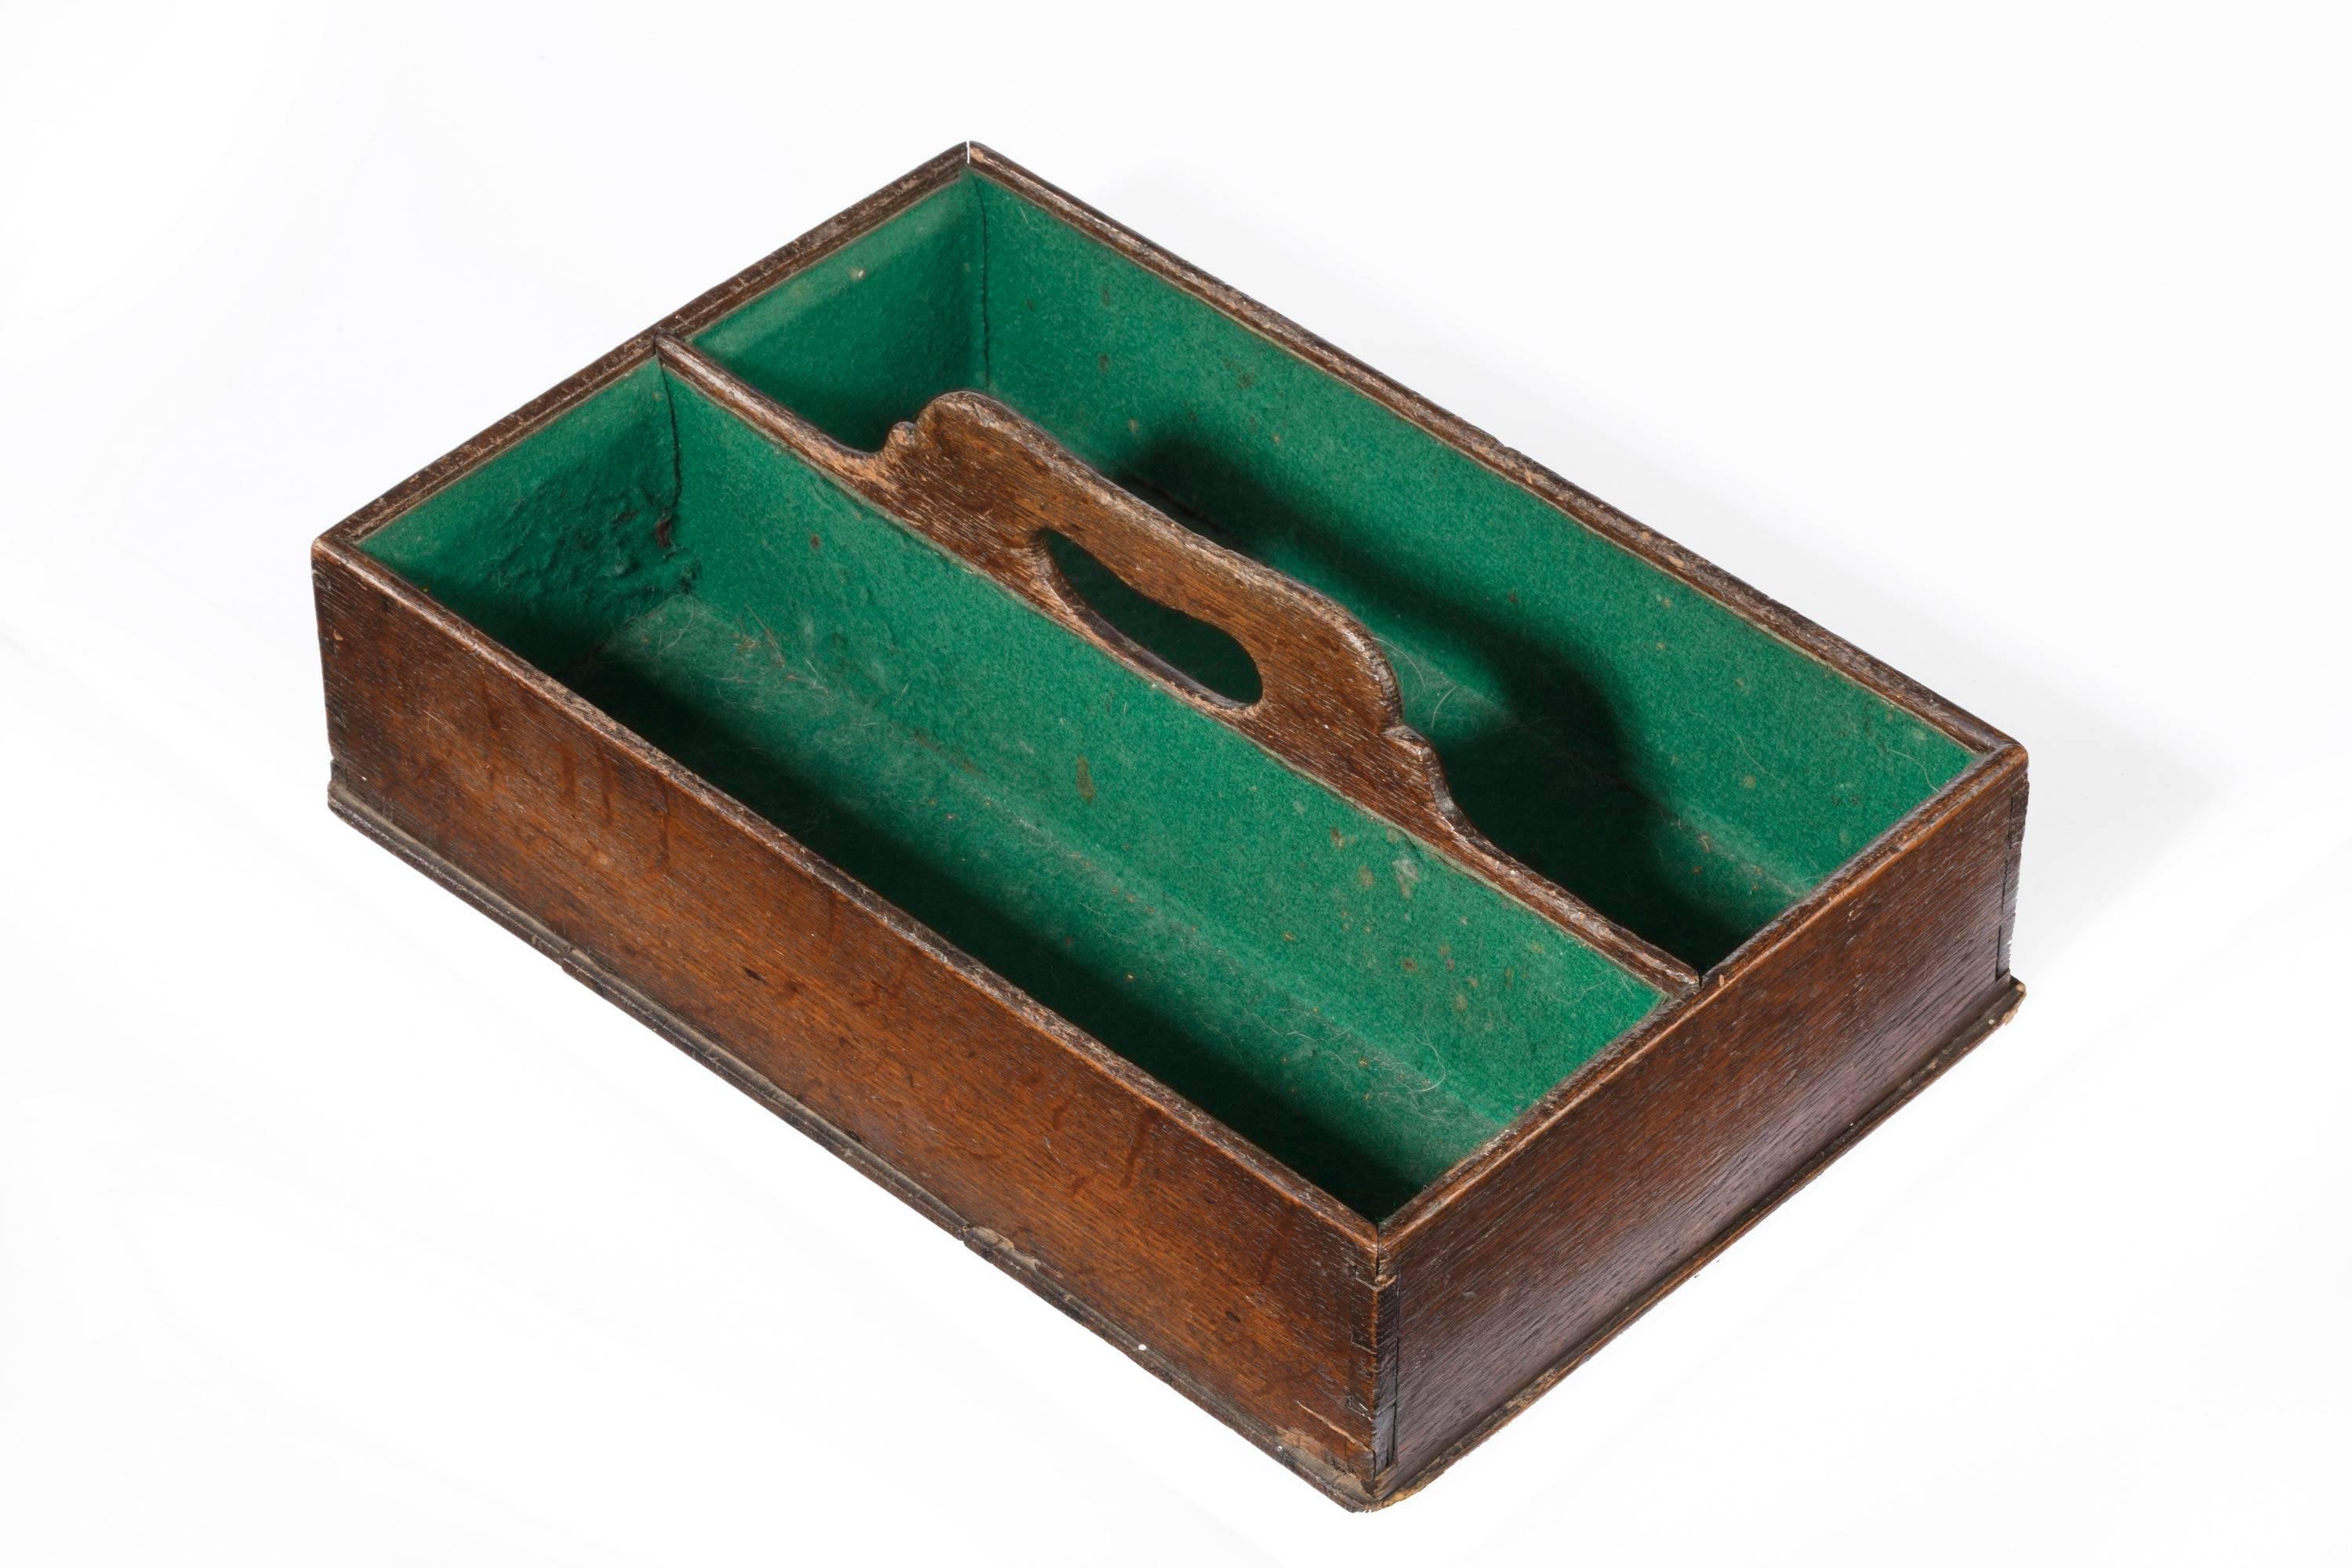 A George III period mahogany two division cutlery box. The handle now showing patina and wear. In good country house condition.